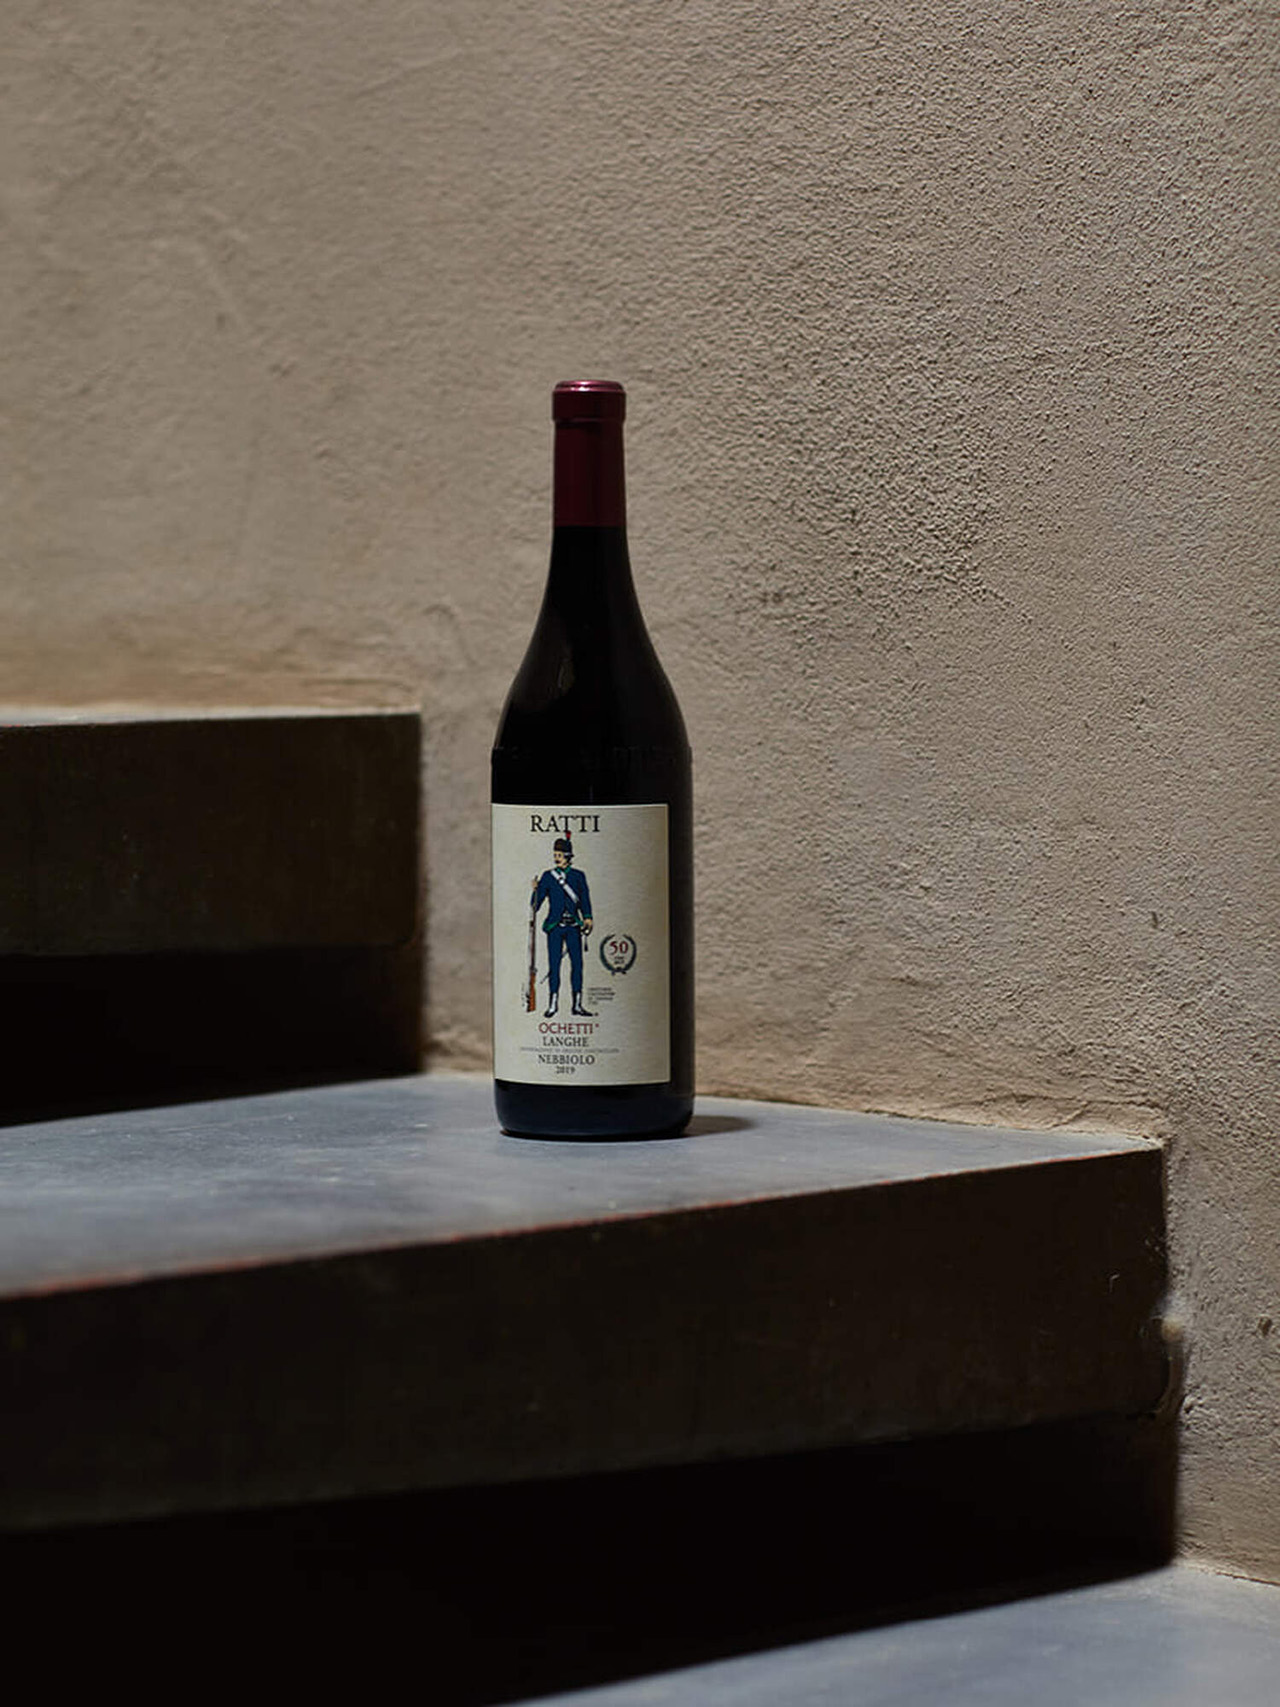 A bottle of Ratti wine on a concrete stairway.